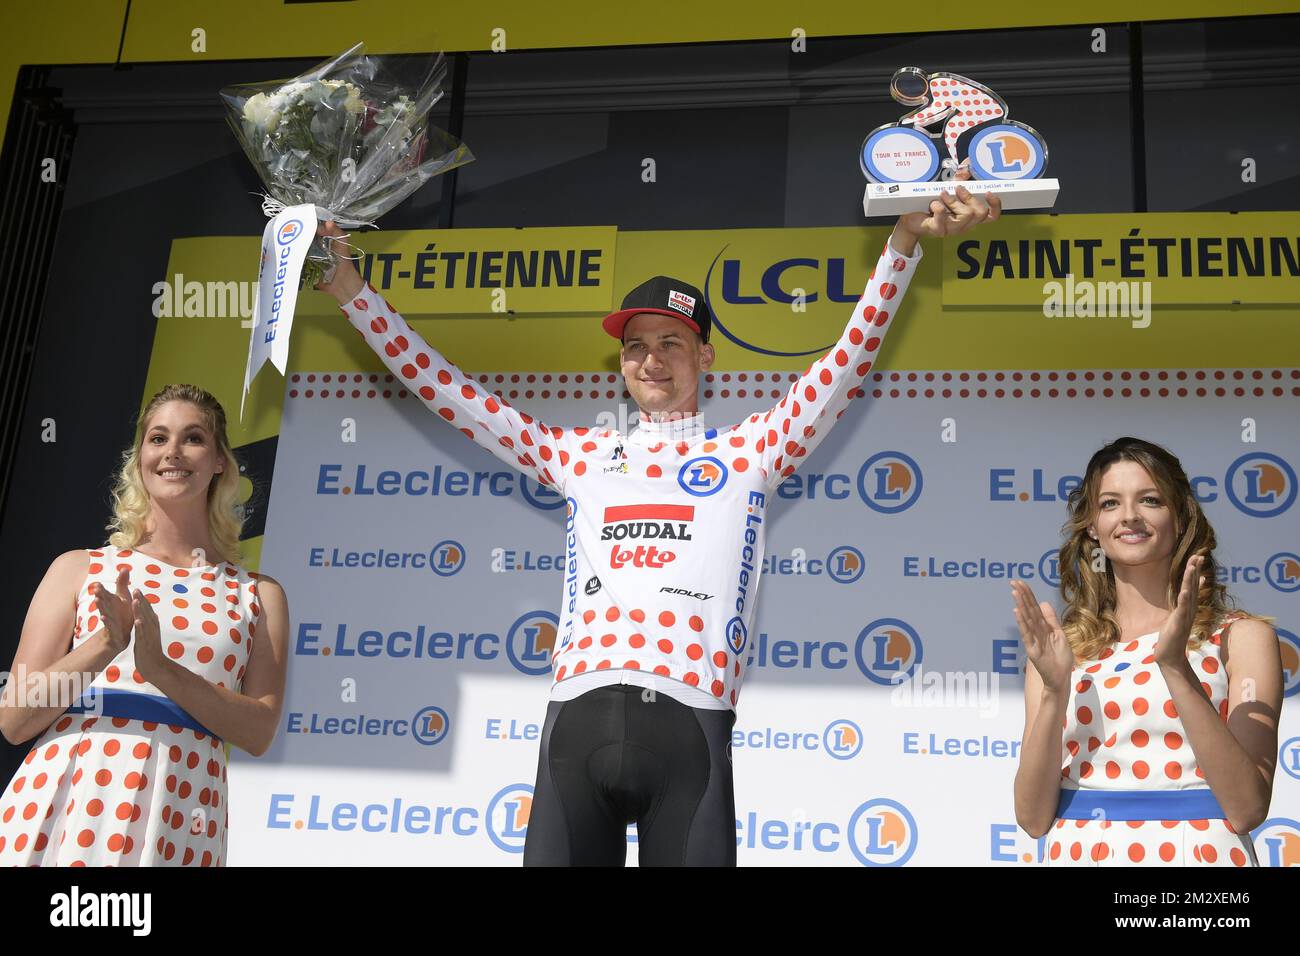 Belgian Tim Wellens of Lotto Soudal wearing the polka dot jersey (maillot a pois rouges - bolletjestrui) of leader in the climbers ranking after the eighth stage of the 106th edition of the Tour de France cycling race, from Macon to Saint-Etienne (200 km), Saturday 13 July 2019 in France. This year's Tour de France starts in Brussels and takes place from July 6th to July 28th. BELGA PHOTO YORICK JANSENS Stock Photo